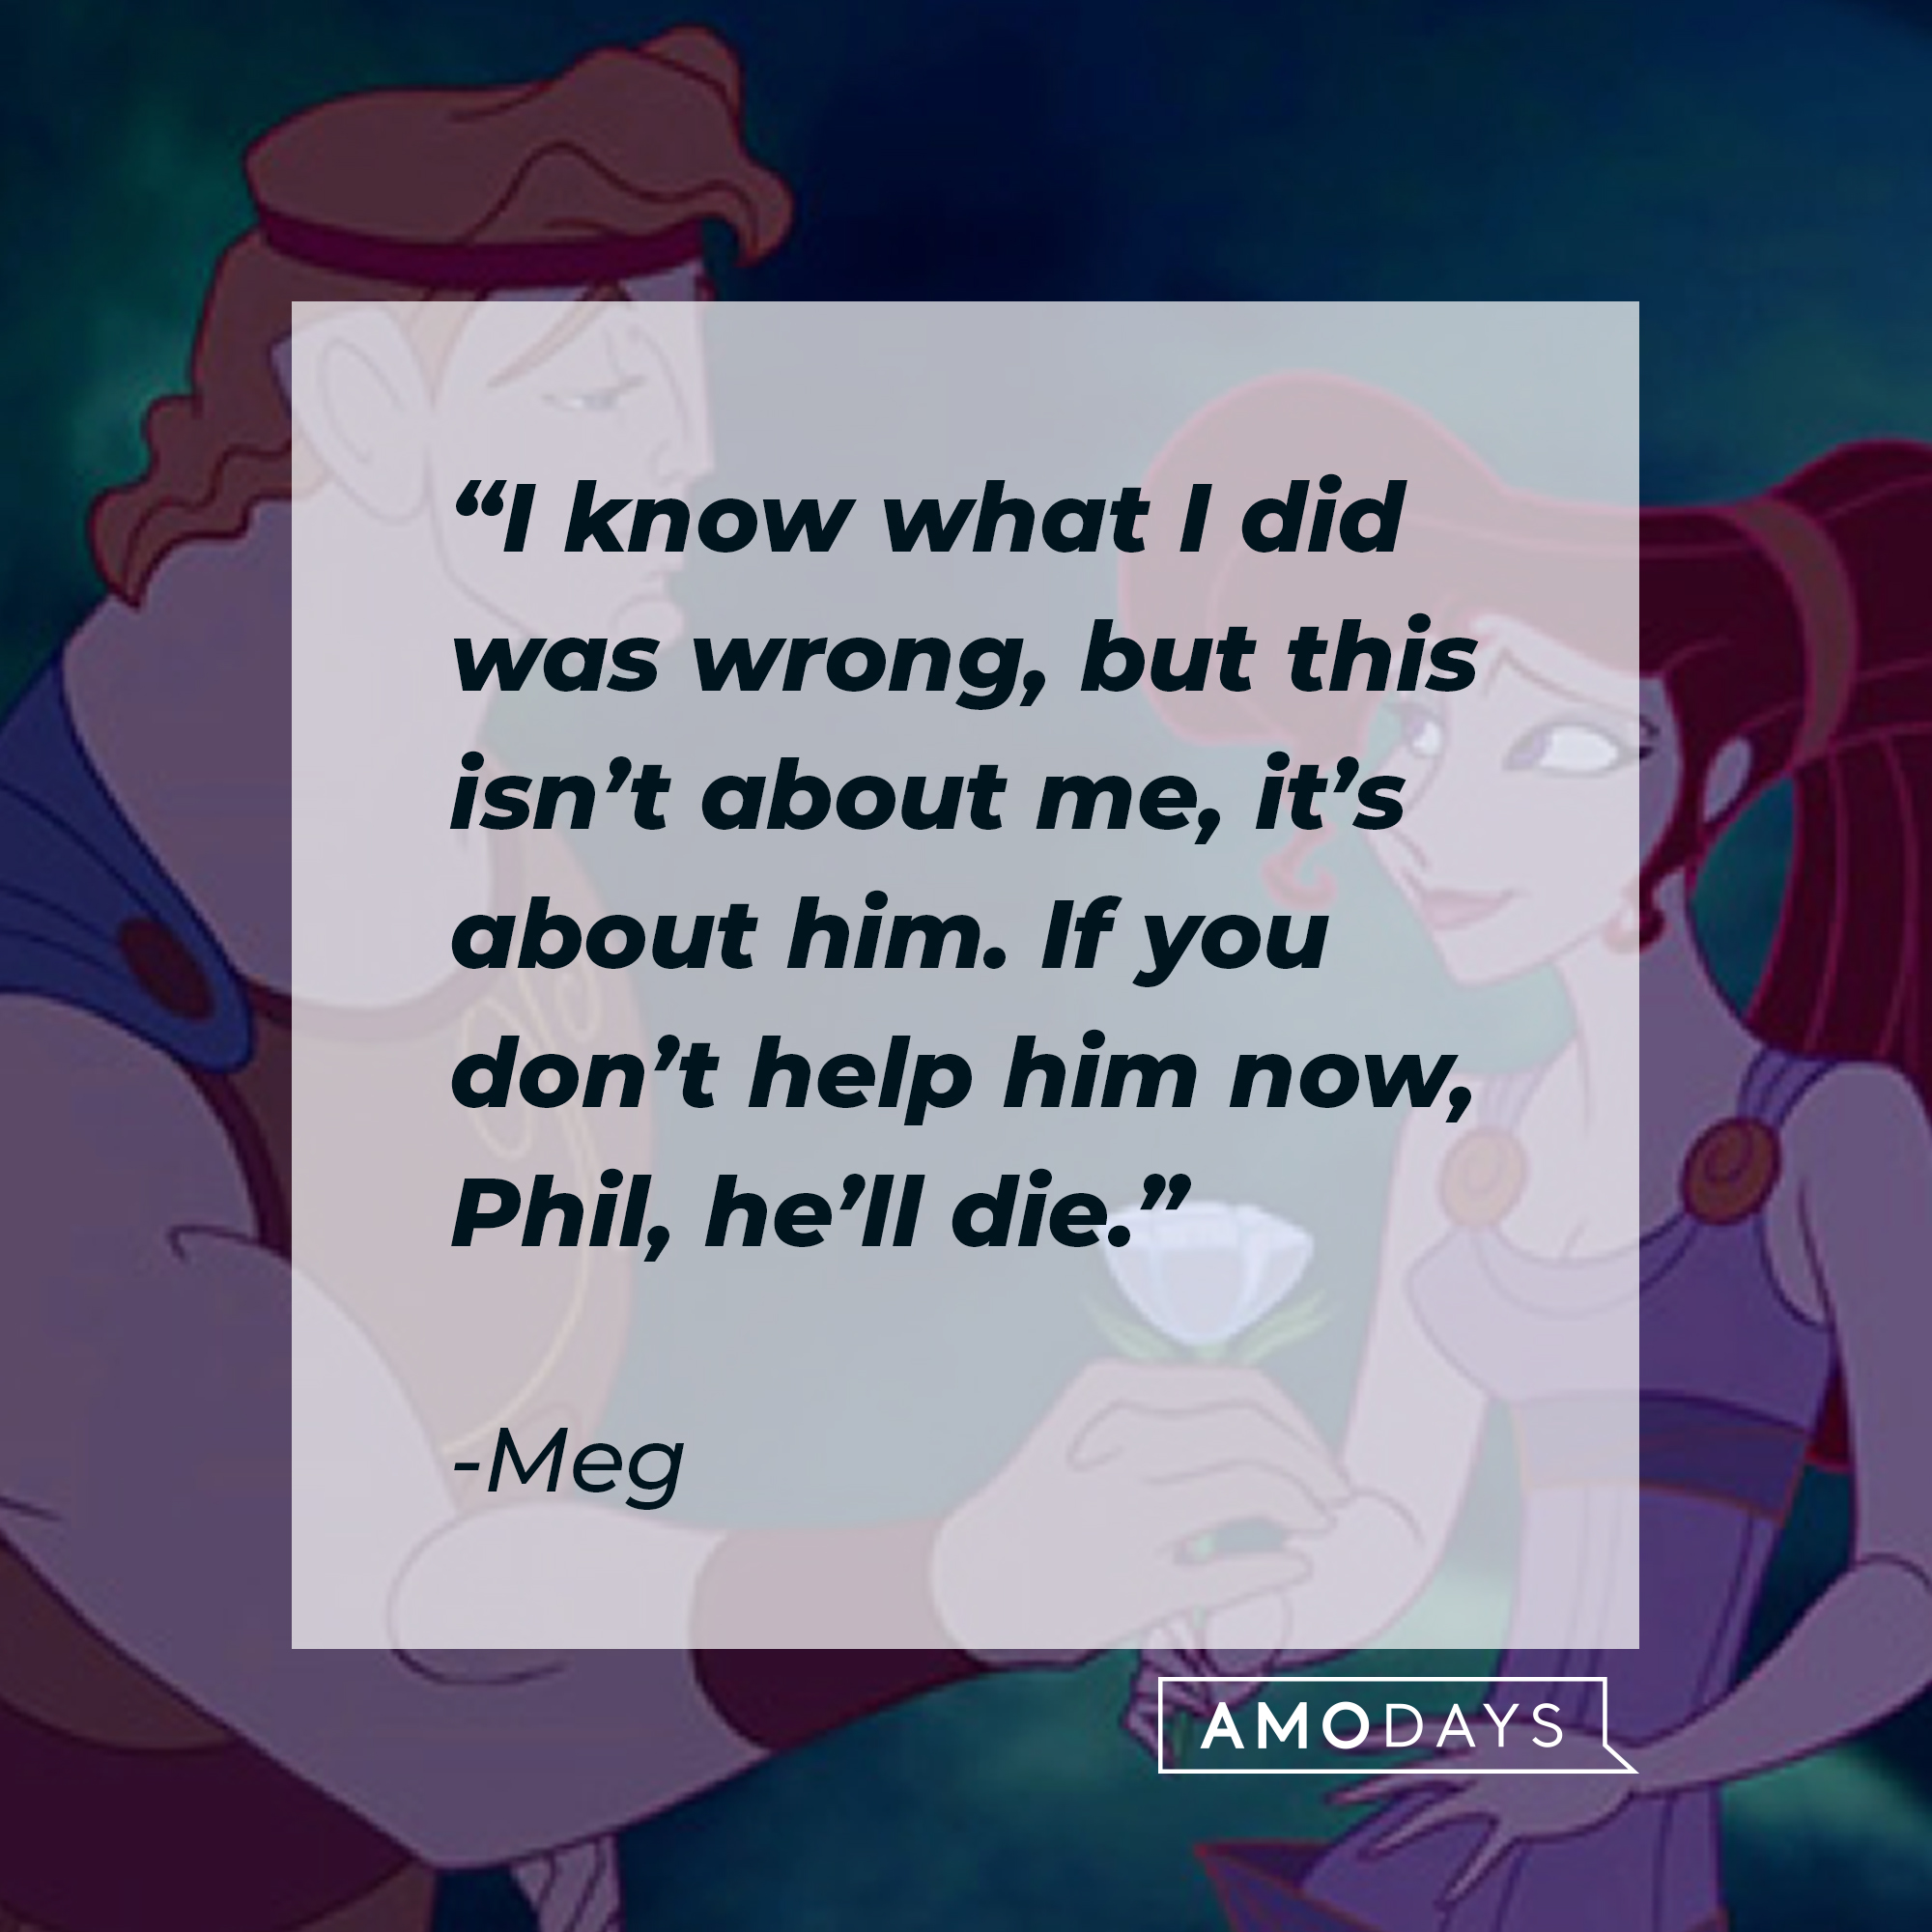 Characters from the "Hercules" movie with Meg’s quote: “I know what I did was wrong, but this isn’t about me, it’s about him. If you don’t help him now, Phil, he’ll die.” | Source: Facebook.com/DisneyHercules